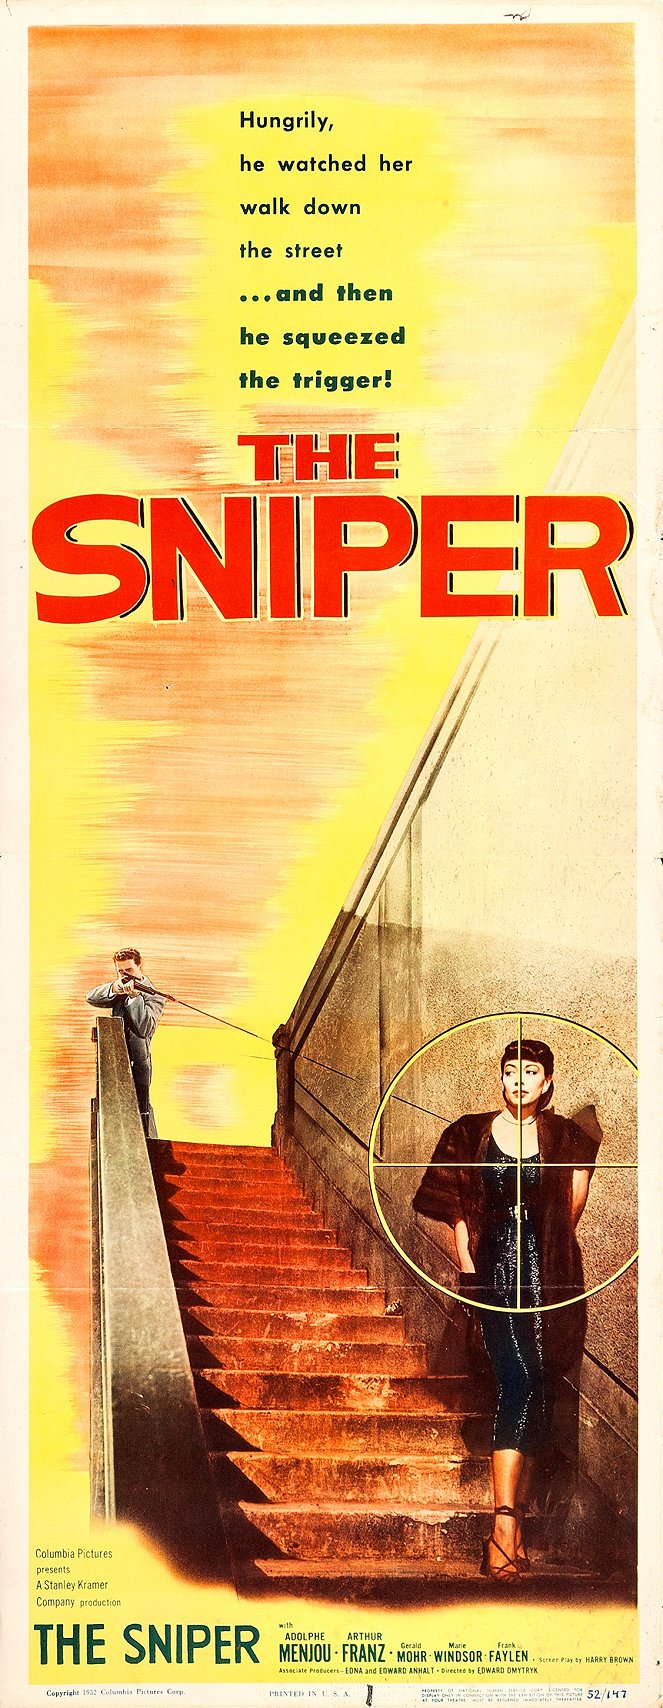 The Sniper - Posters